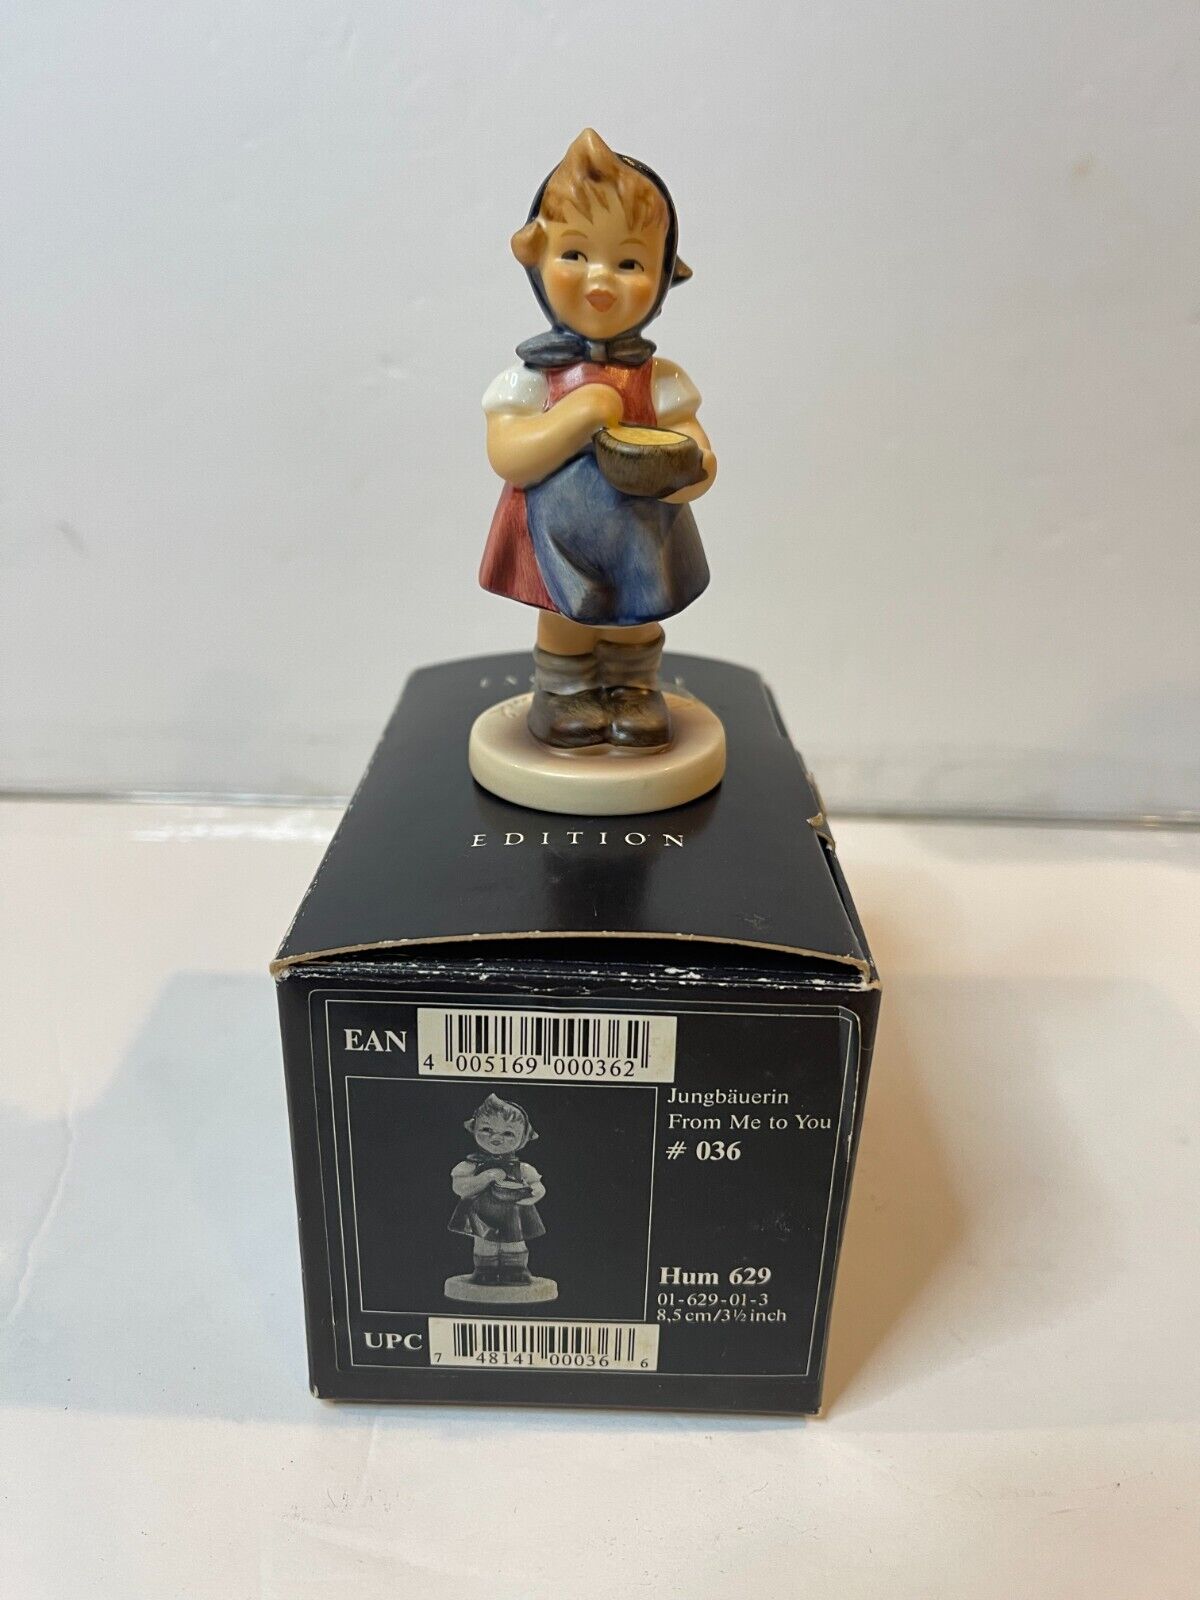 Hummel "From Me to You" Figurine Hum 629   #036    1995-1996 3 1/2" Tall